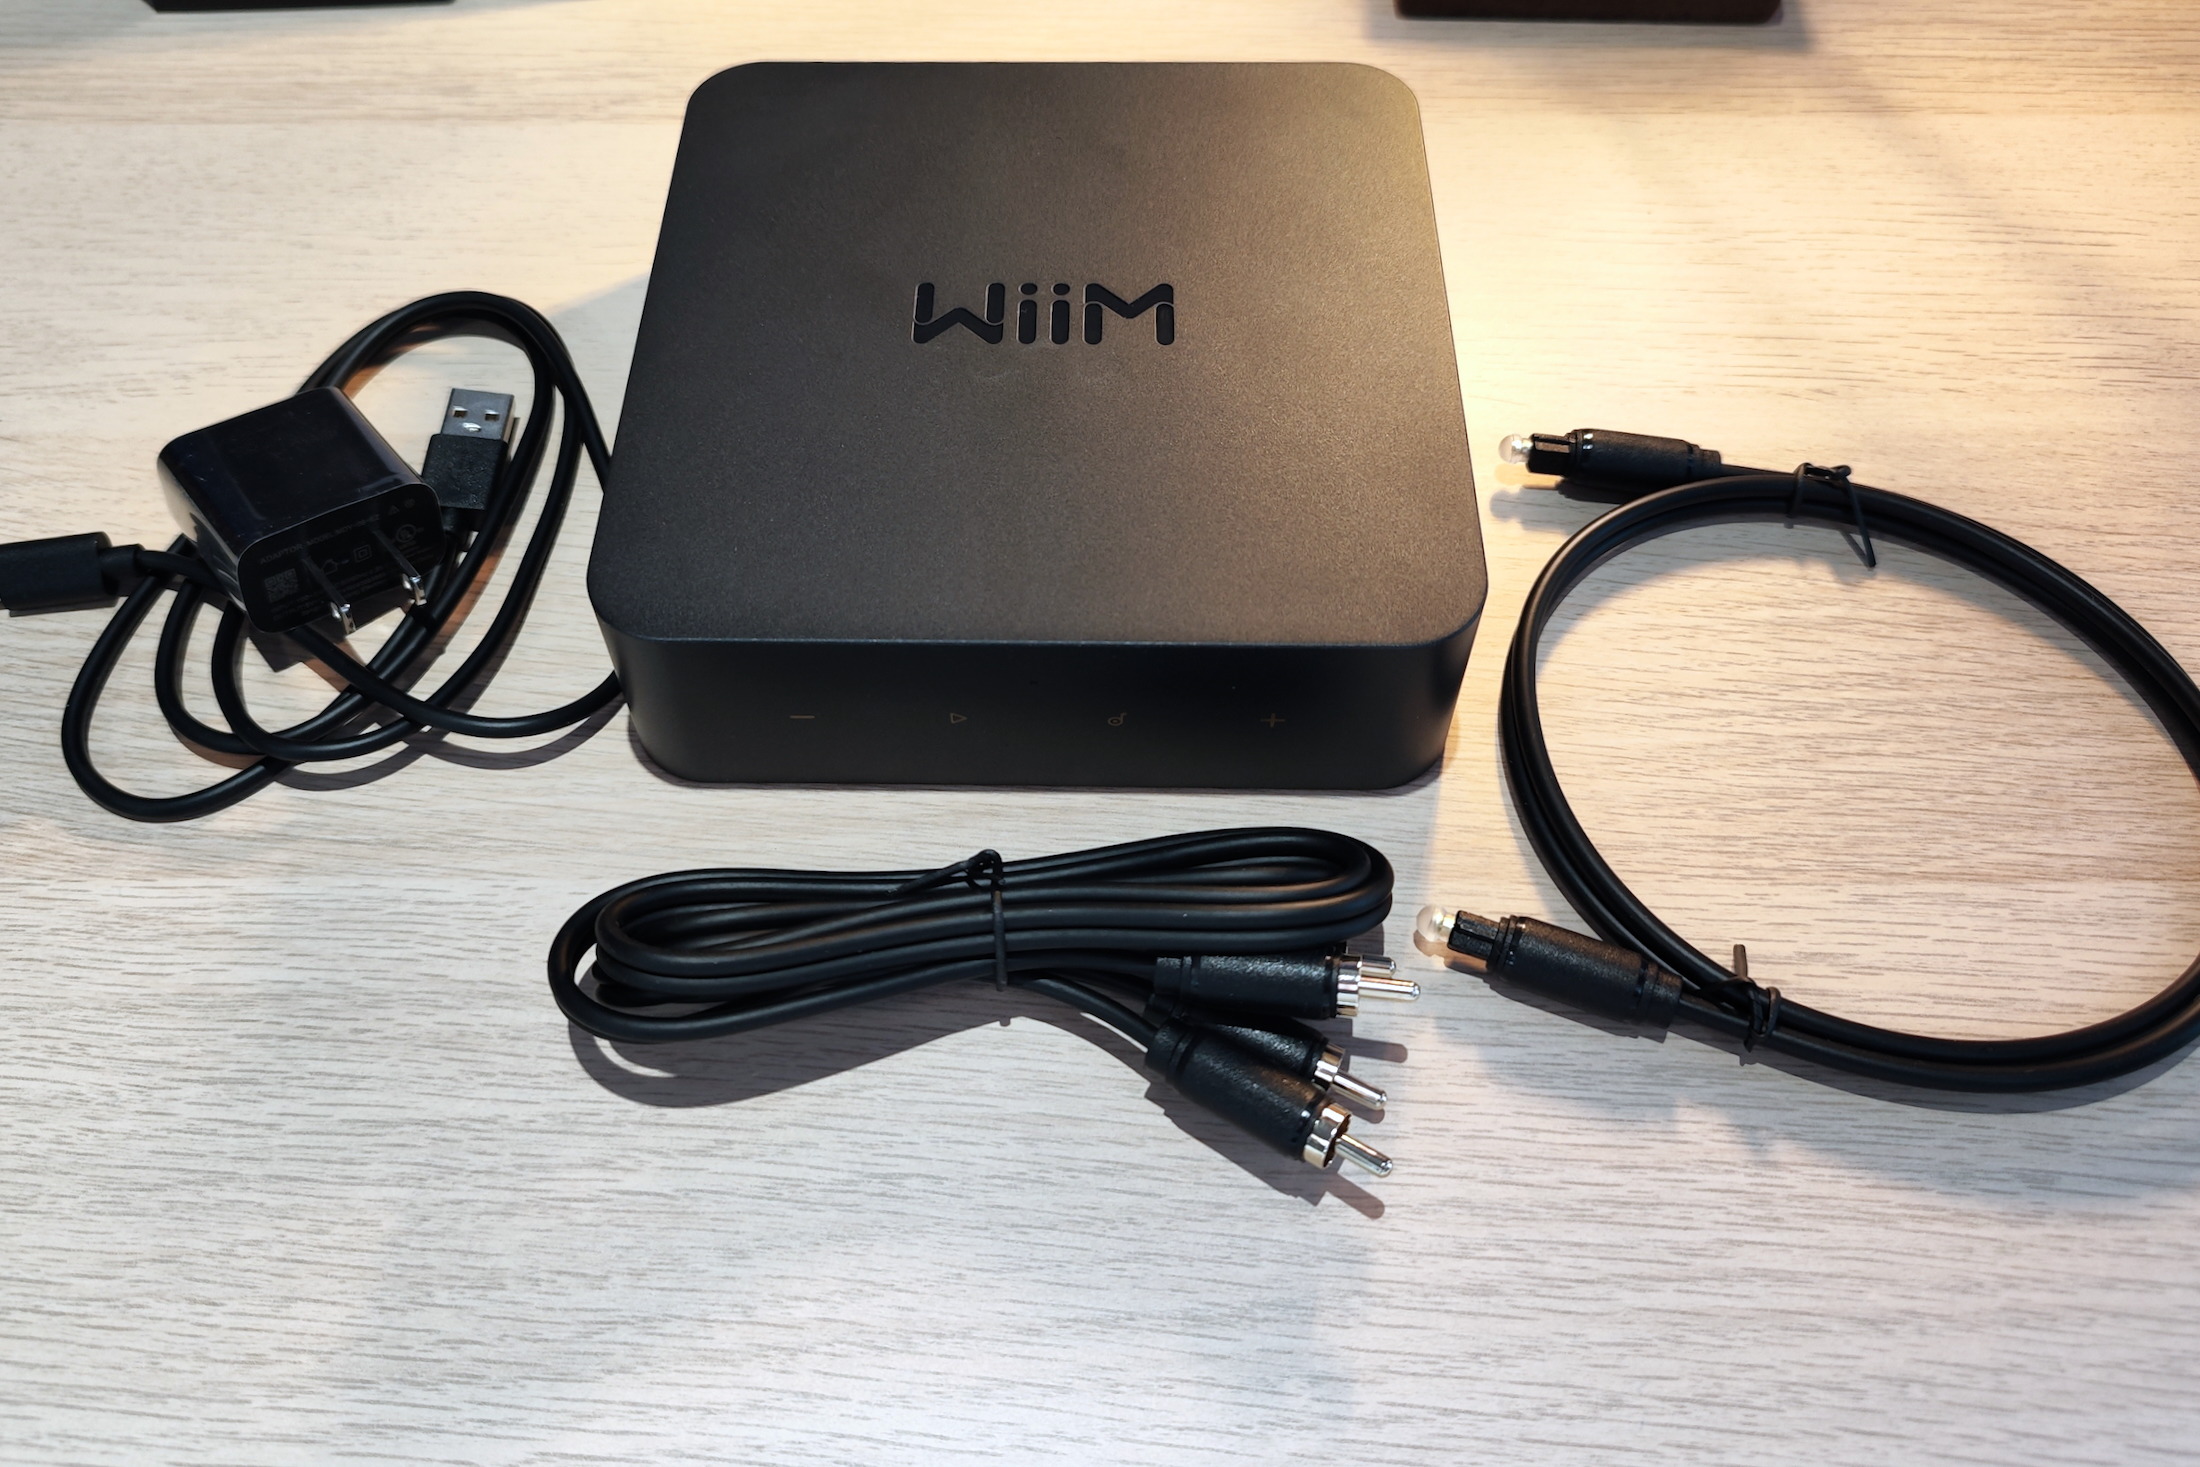 Getting Started with WiiM Pro: Essential Devices and Audio Compatibility